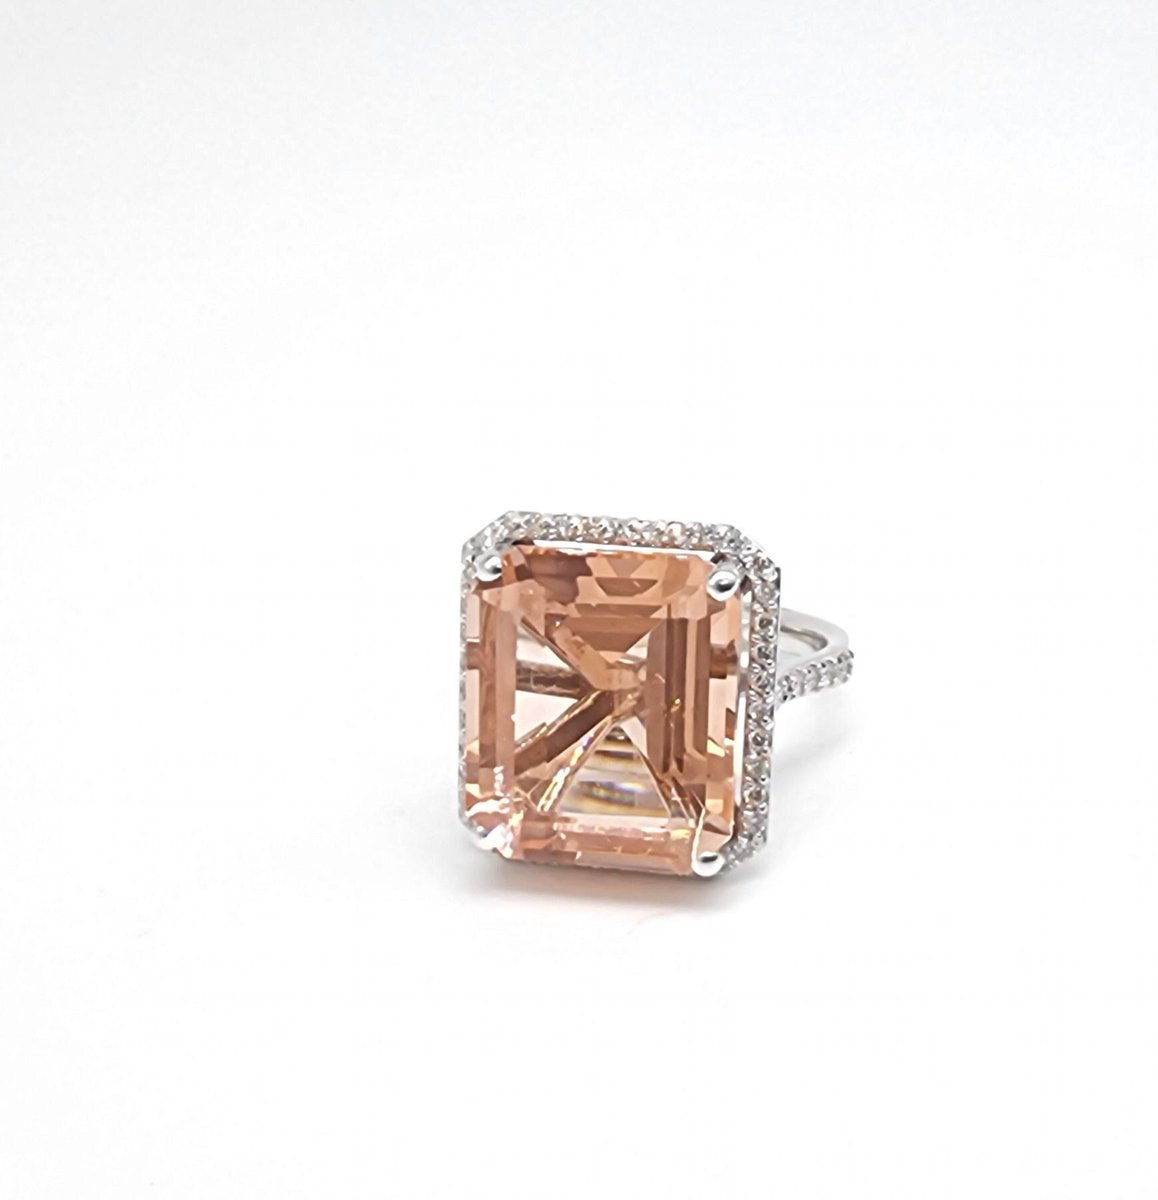 Excited to share the latest addition to my #etsy shop: Ring Morganite gemstone 14 k white gold 54 Natural Diamonds etsy.me/3XcUQ5Q #yes #whitegold #ethicalgemstones #whitegoldjewelry #morganitegems #diamondaccents #elegantjewelry #luxuryjewels #statementpiece